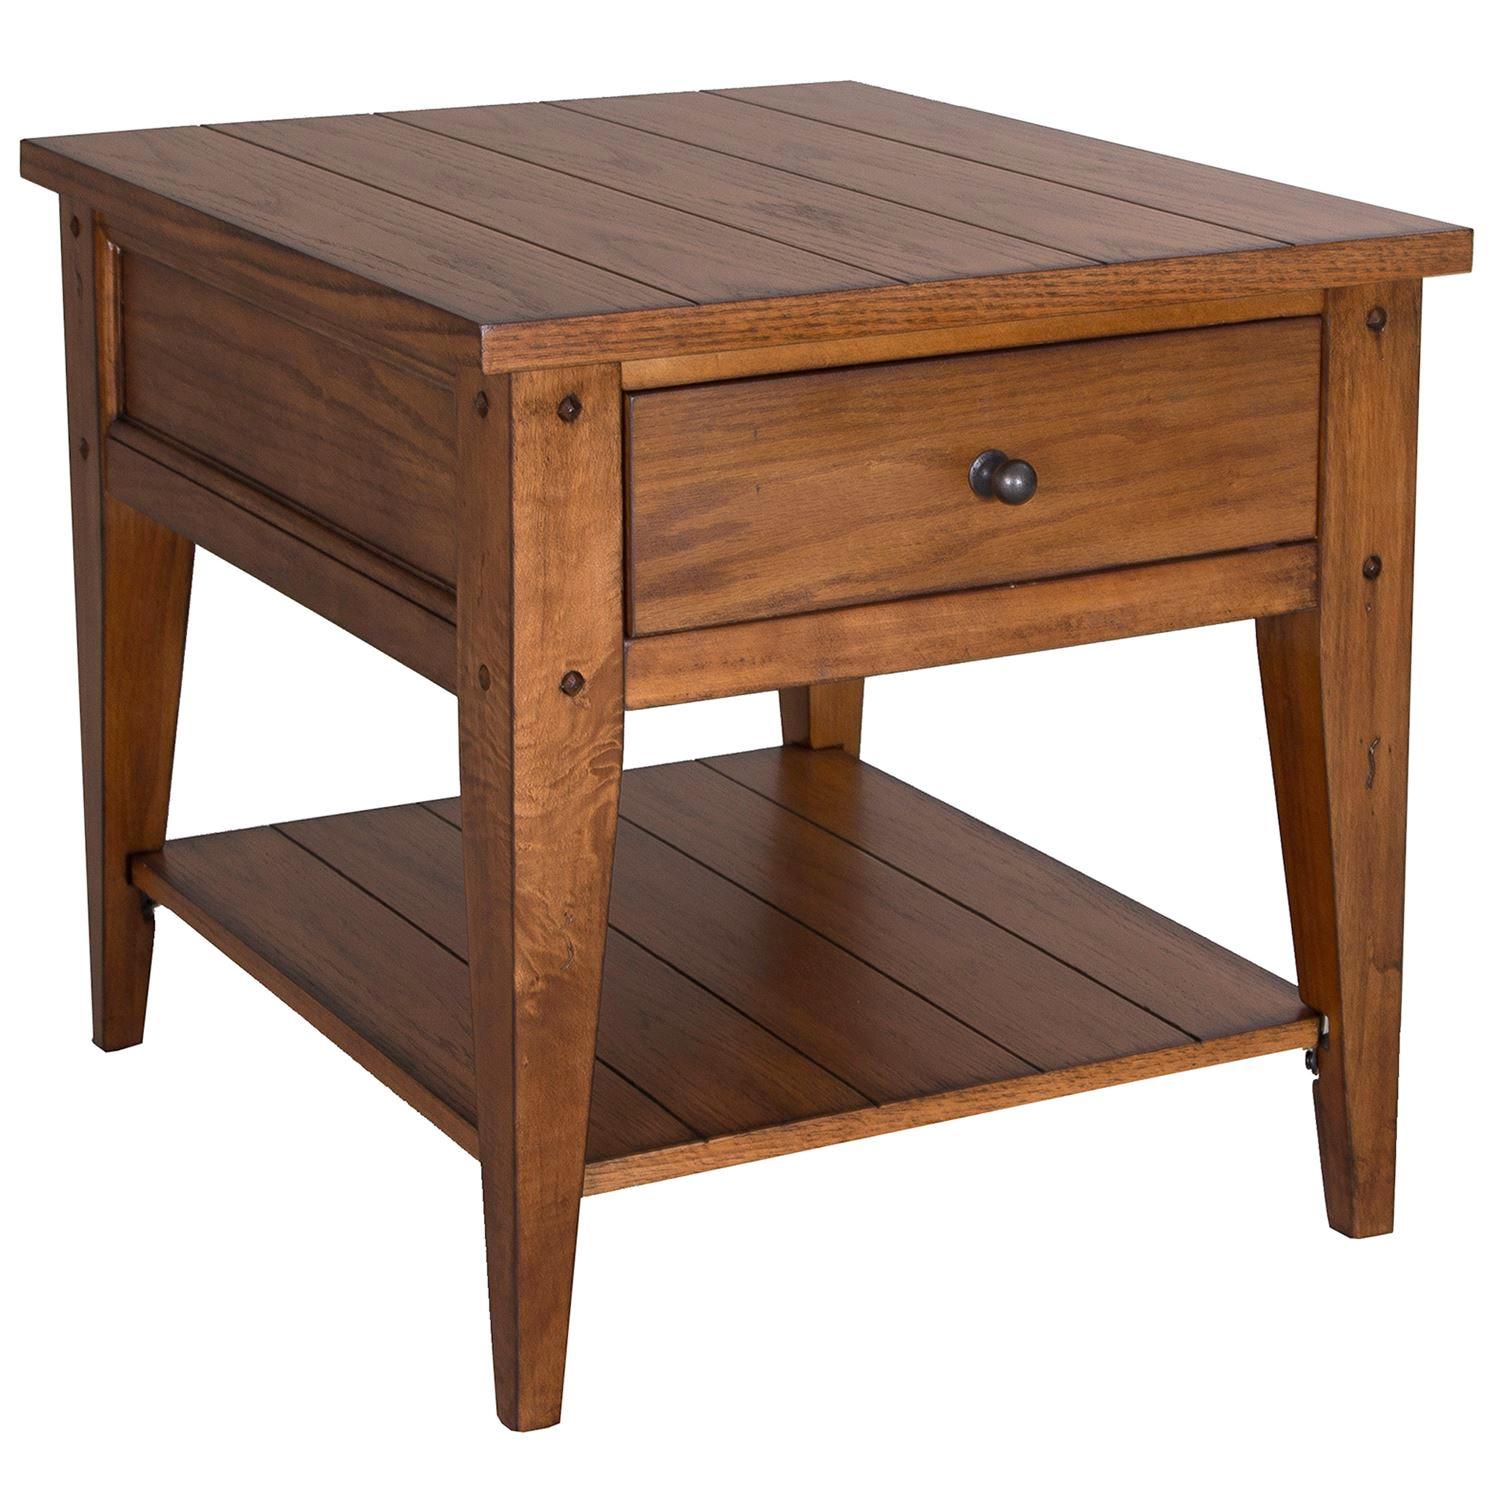 Rustic End Table Lake House  (110-OT) End Table 110-OT1020 in Brown, Oak Veneers Lacquer